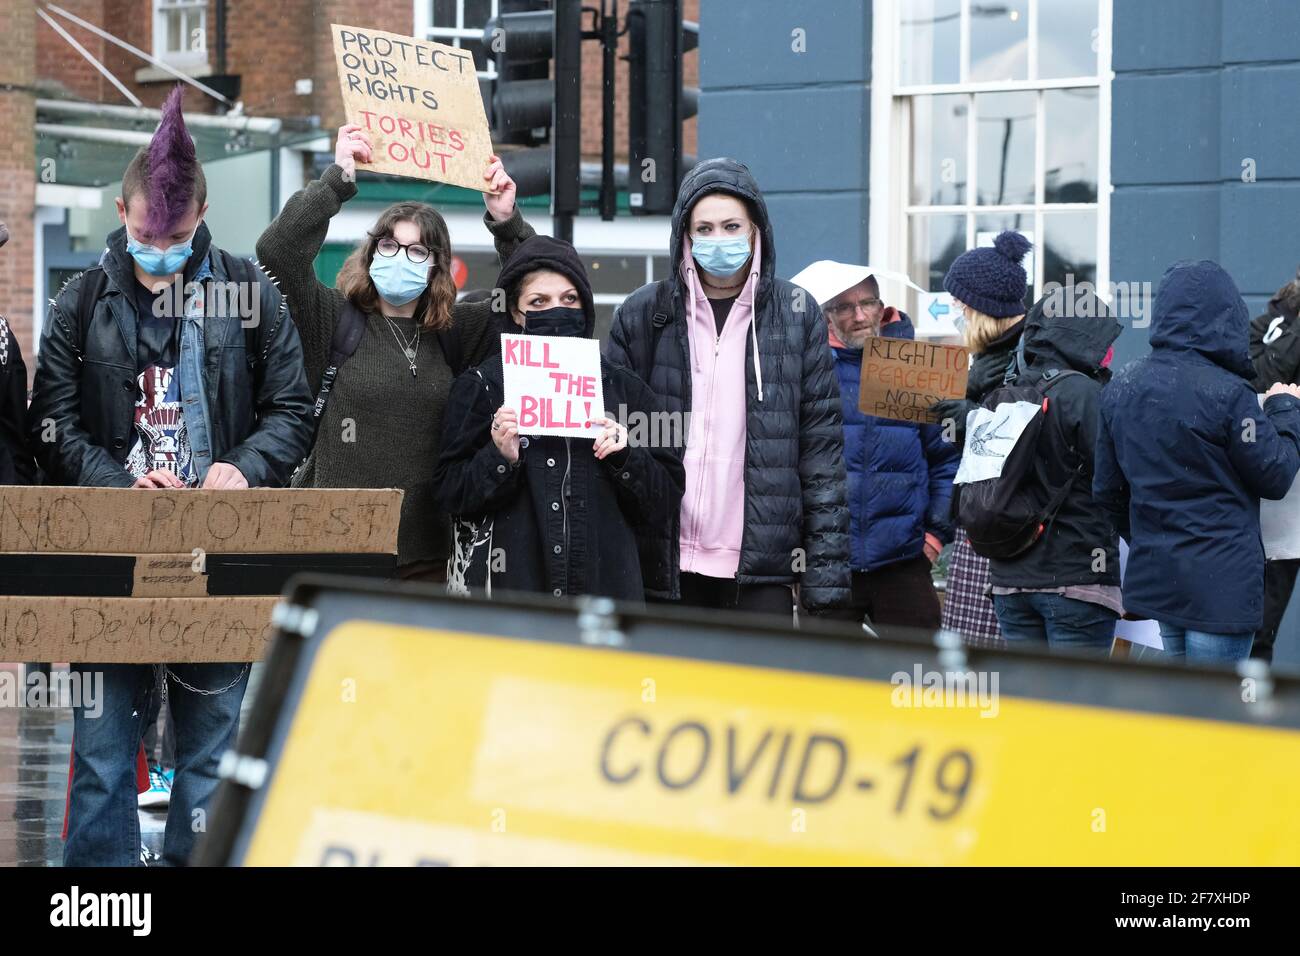 Worcester, Worcestershire, UK – Saturday 10th April 2021 – Kill The Bill protesters demonstrate in Worcester city centre against the new Police, Crime, Sentencing and Courts Bill ( PCSC ) which they feel will limit their rights to legal protest. Photo Steven May / Alamy Live News Stock Photo